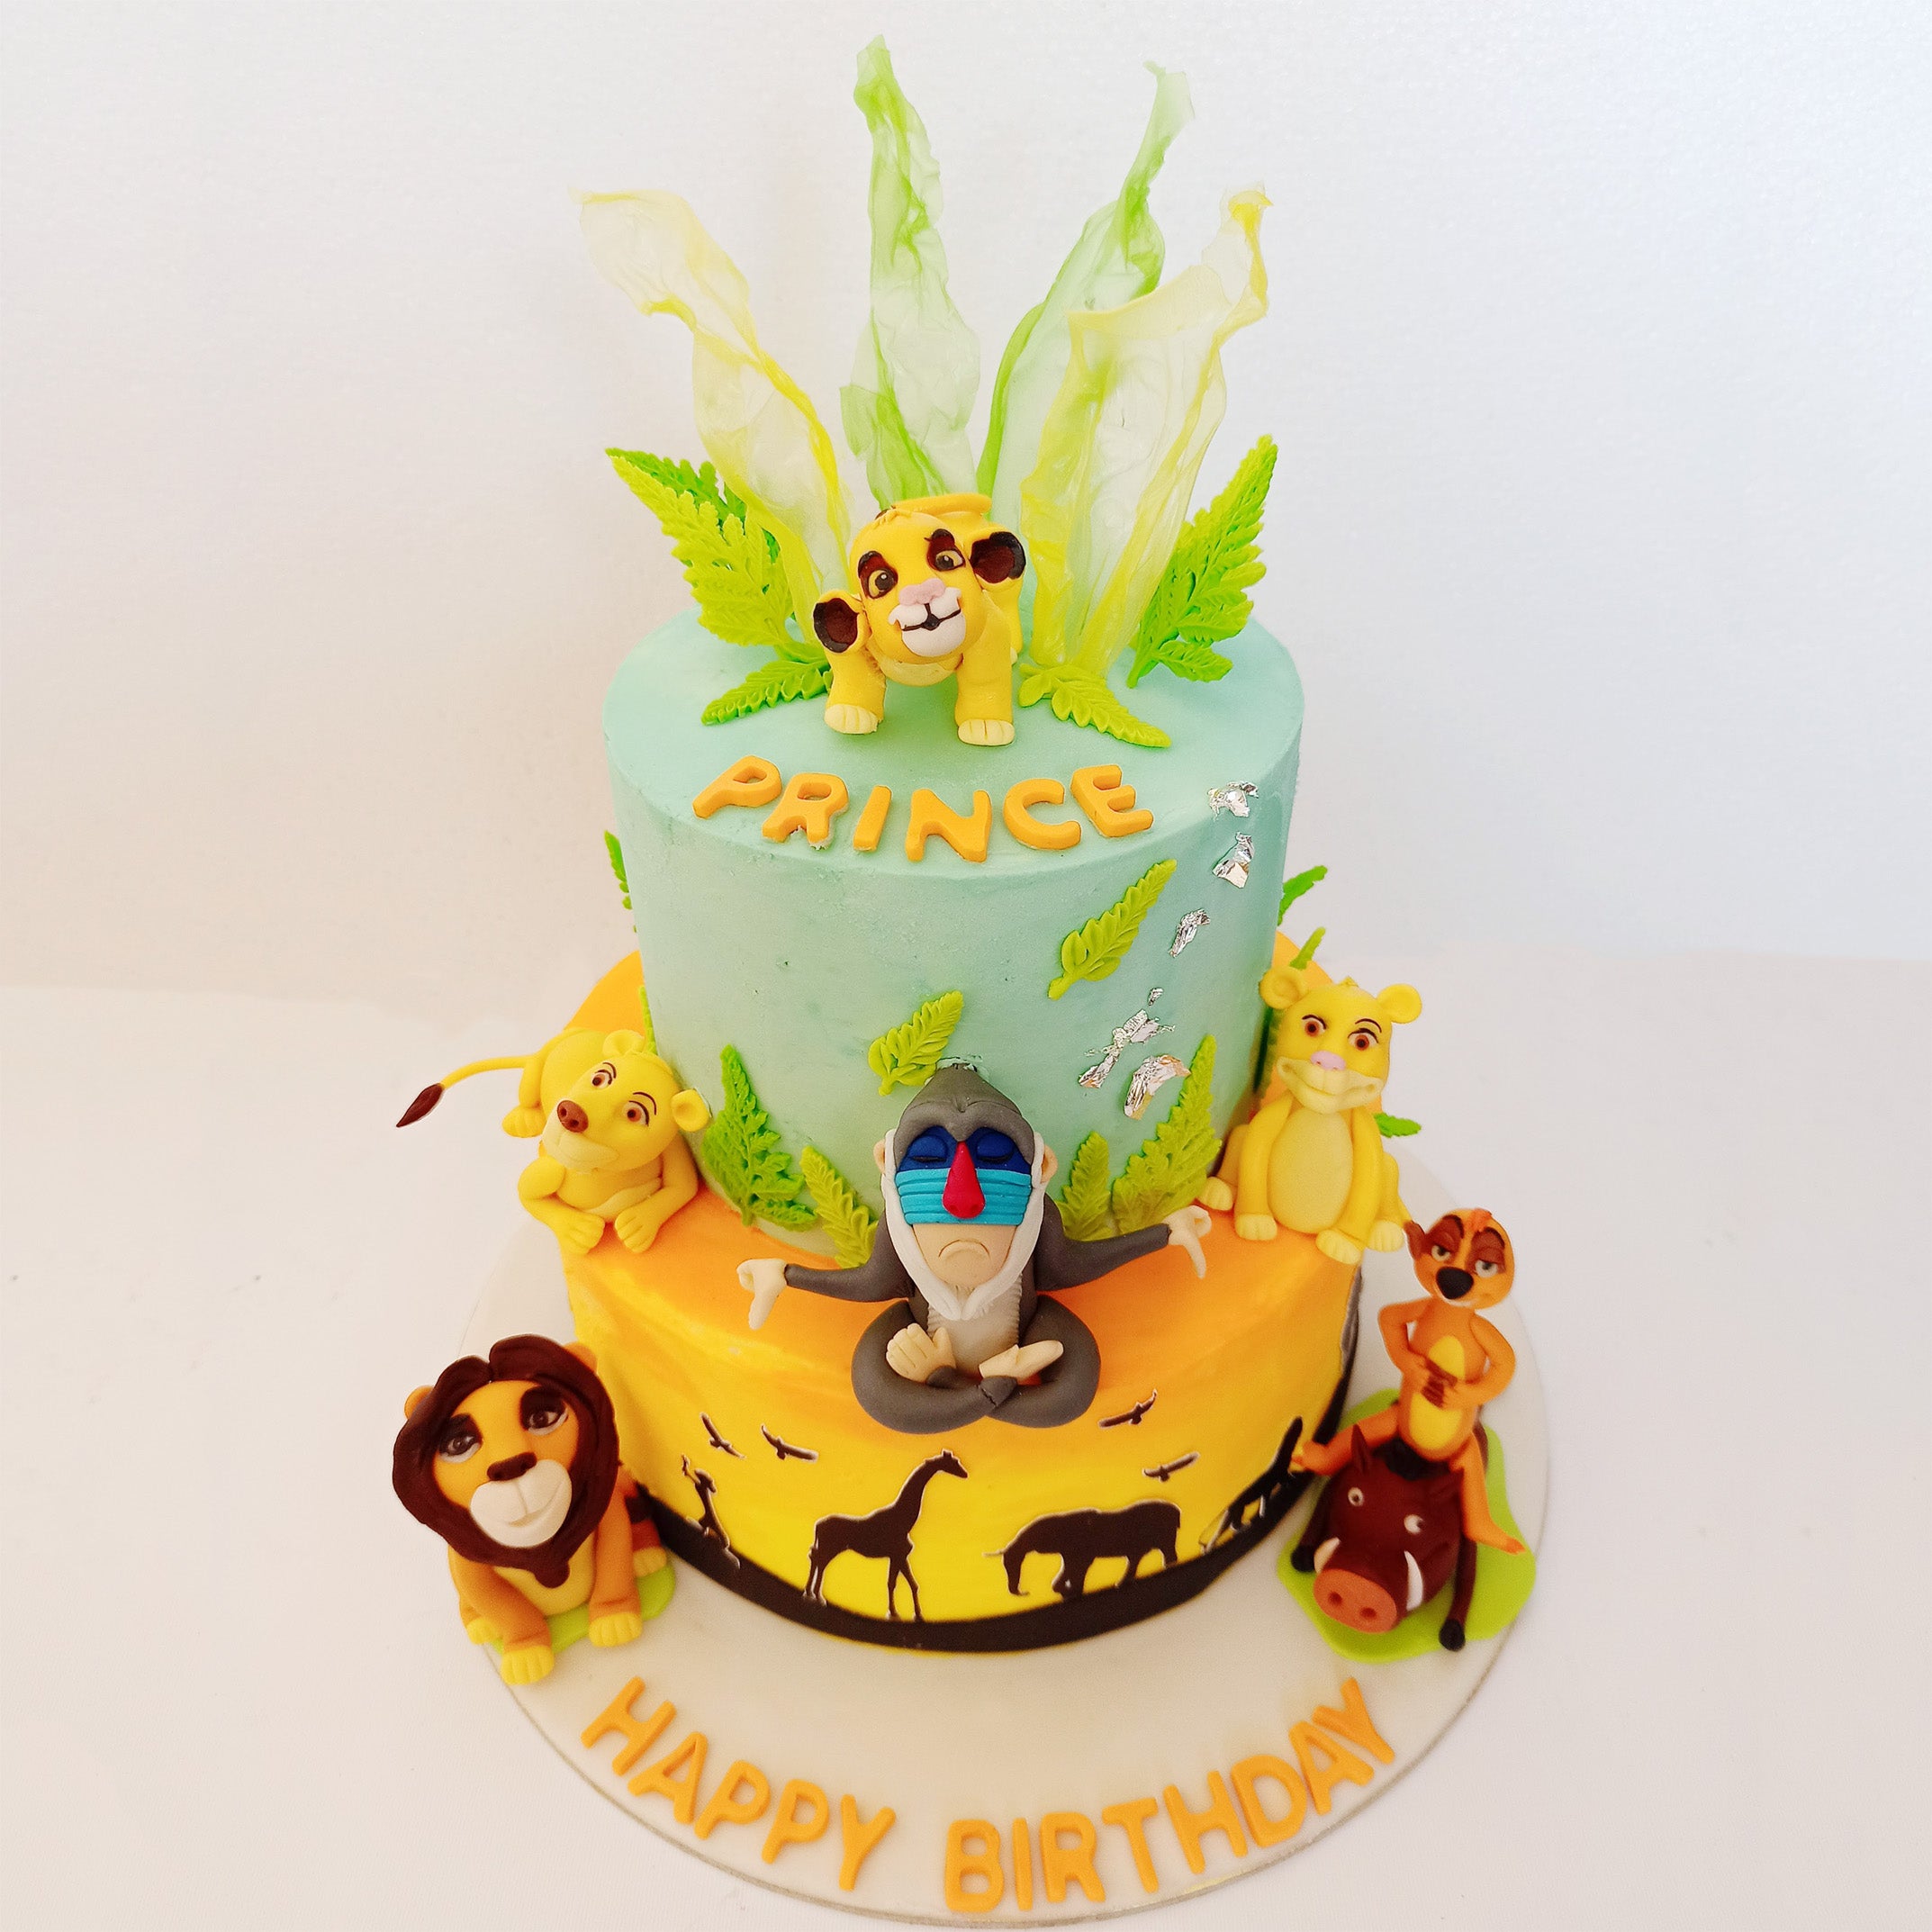 Amazon.com: Lion King Birthday Cake Topper with Simba and Decorative Themed  Accessories (Unique Design) : Grocery & Gourmet Food